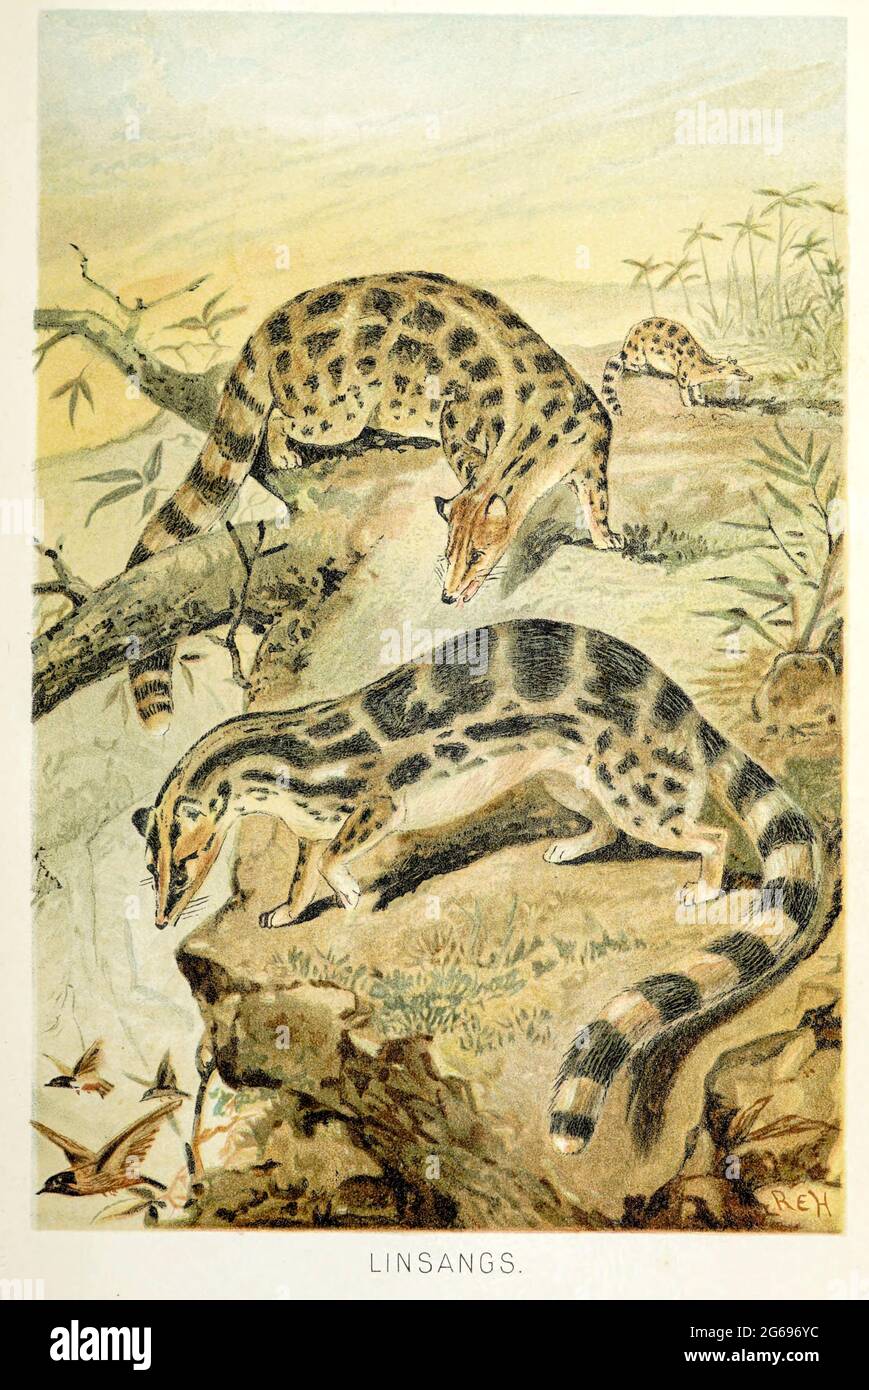 The linsangs are four species of tree-dwelling carnivorous mammals From the book ' Royal Natural History ' Volume 1 Edited by  Richard Lydekker, Published in London by Frederick Warne & Co in 1893-1894 Stock Photo